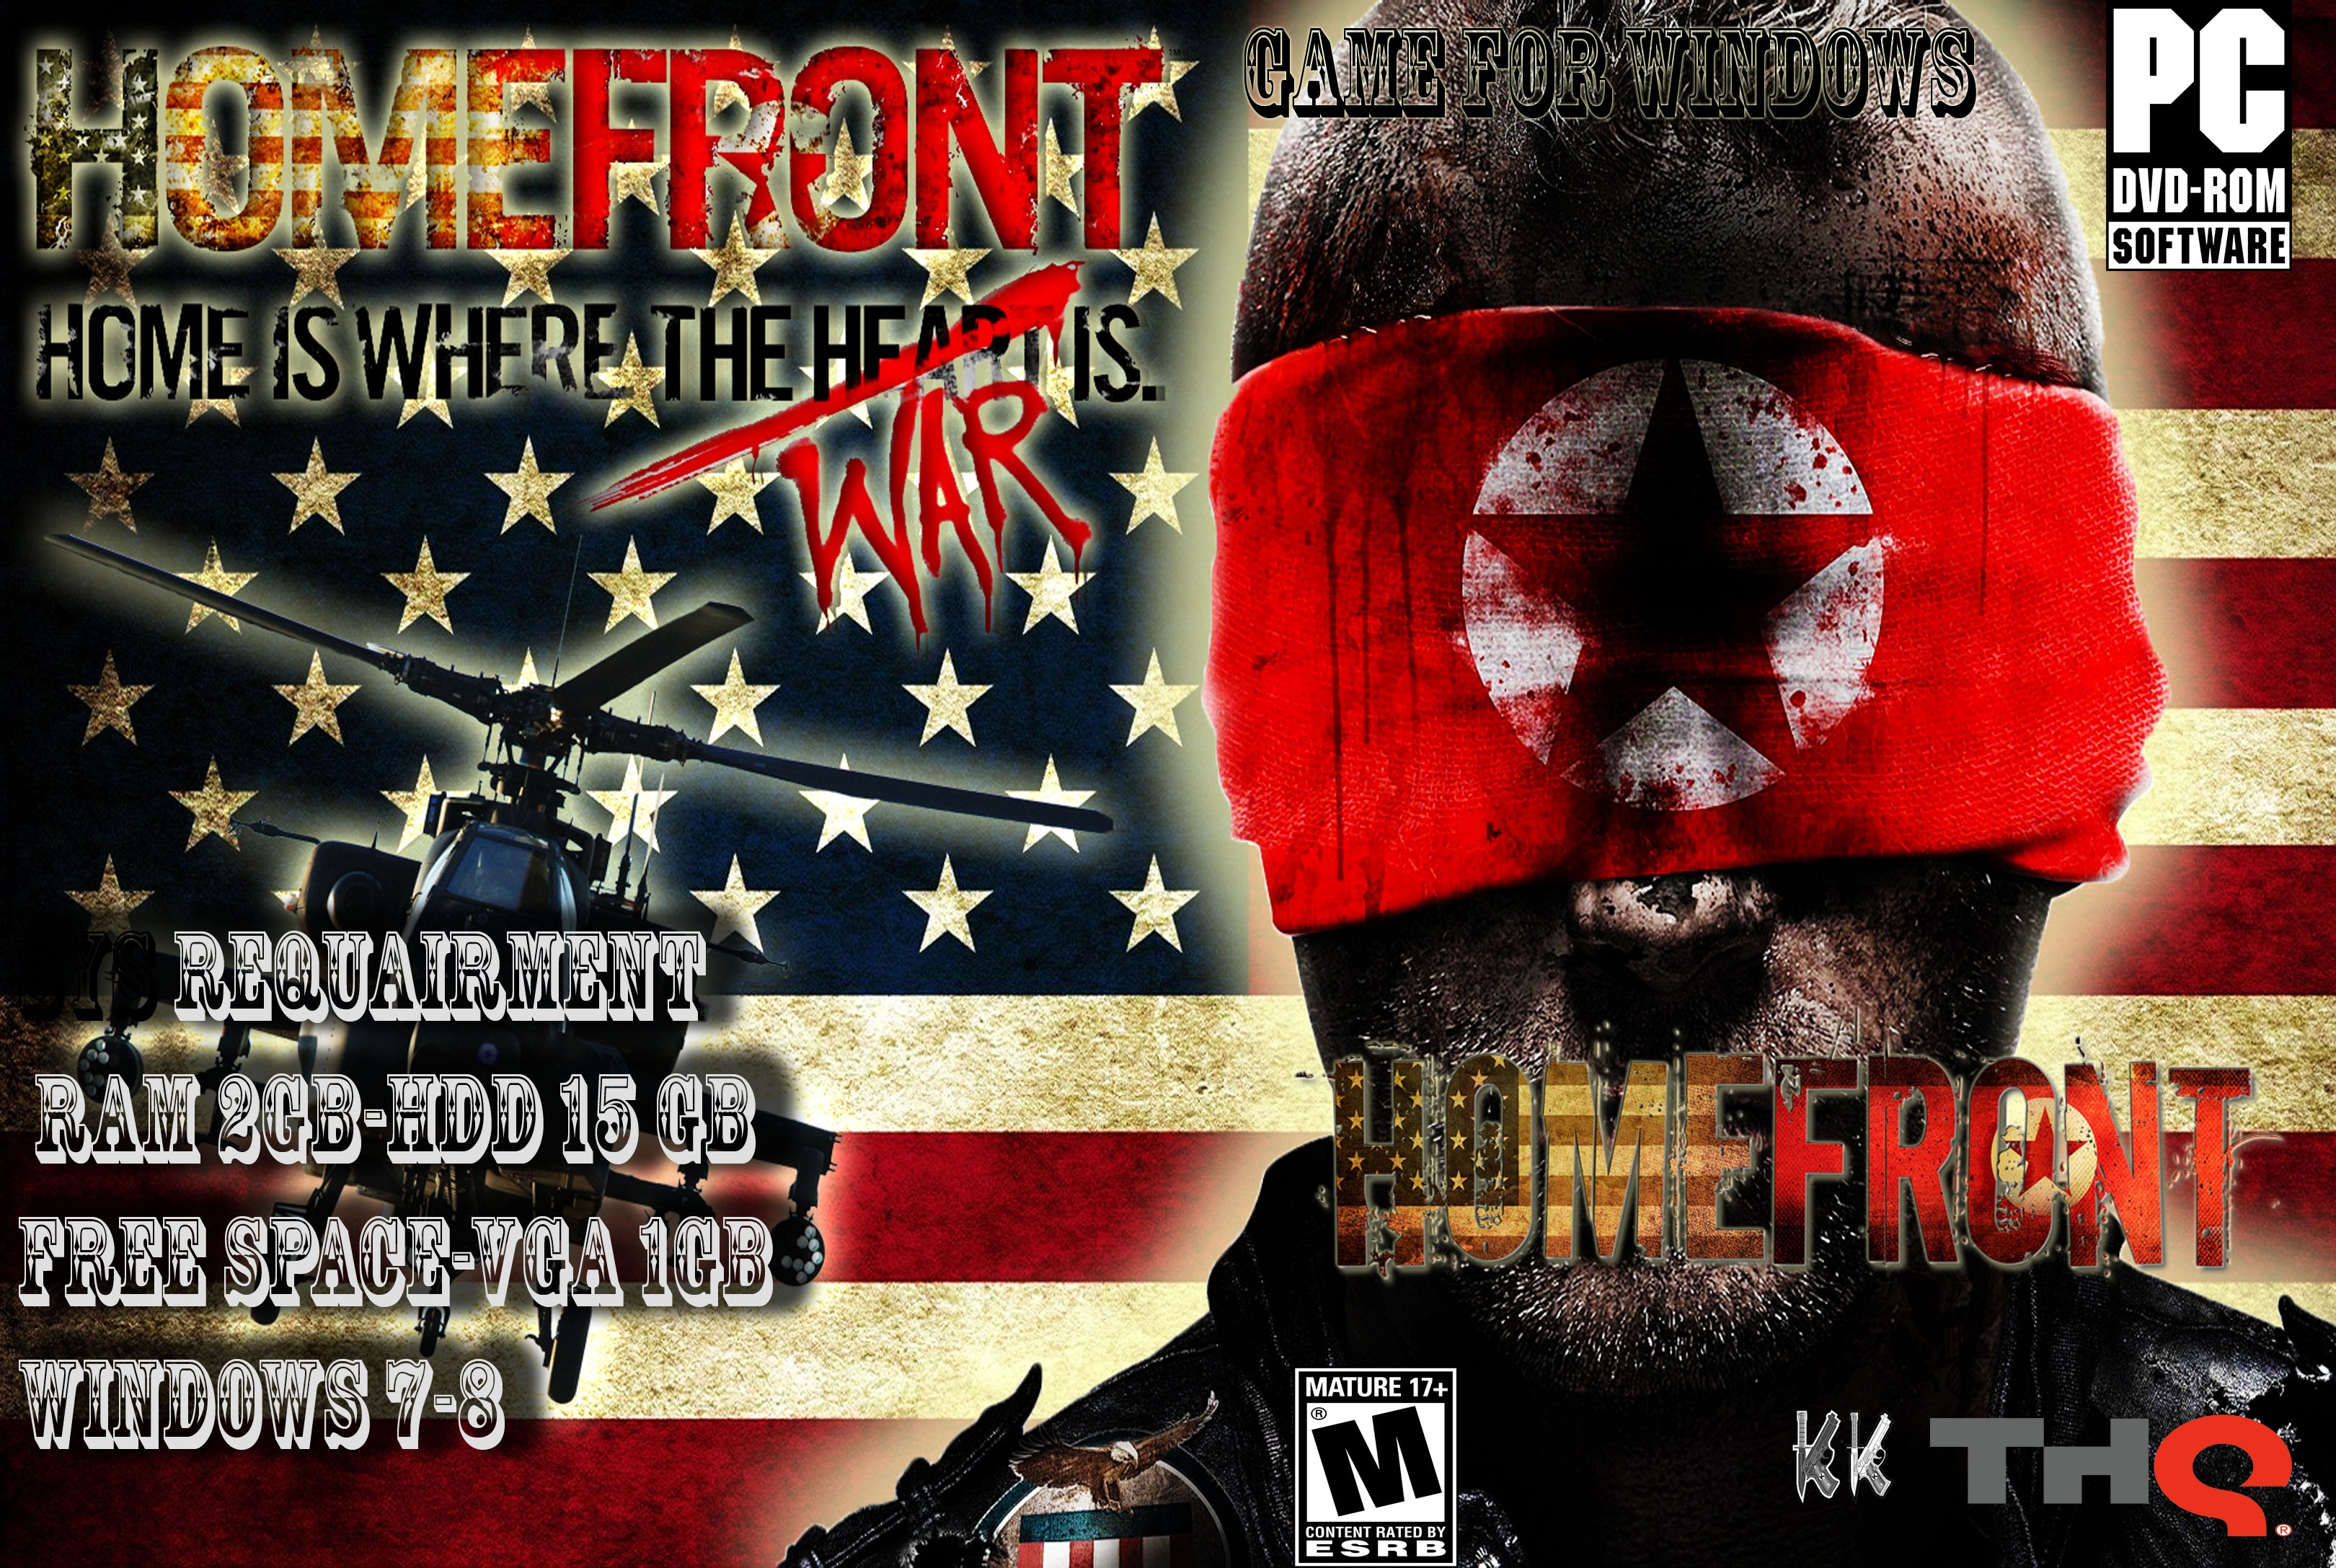 HomeFront box cover